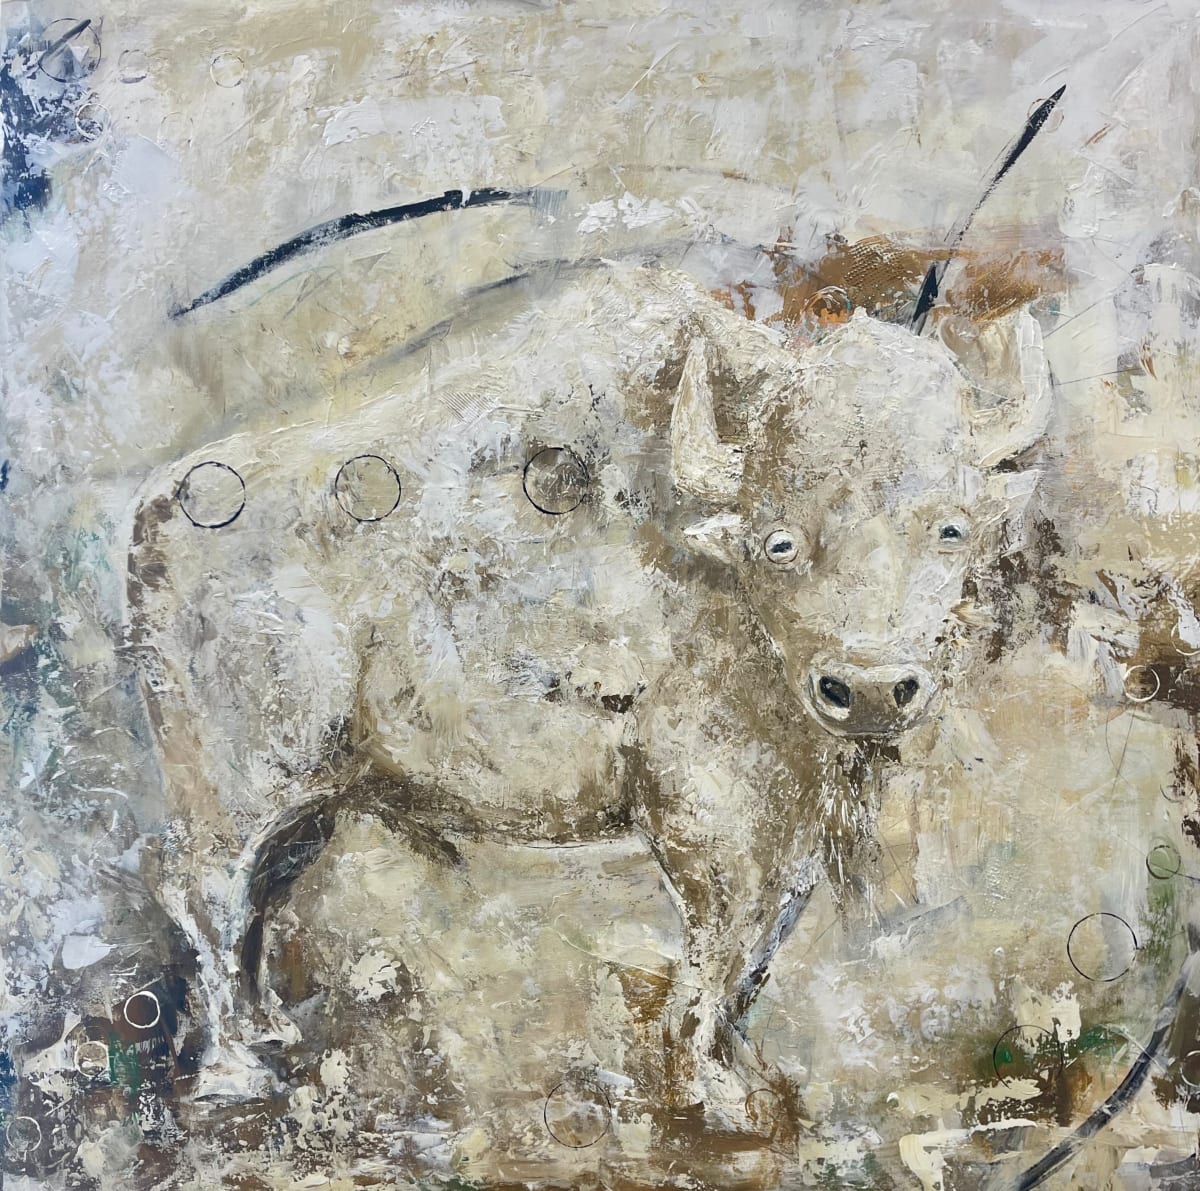 Ghost Buffalo by Janetta Smith  Image: Mixed Media Fun Figurative painting